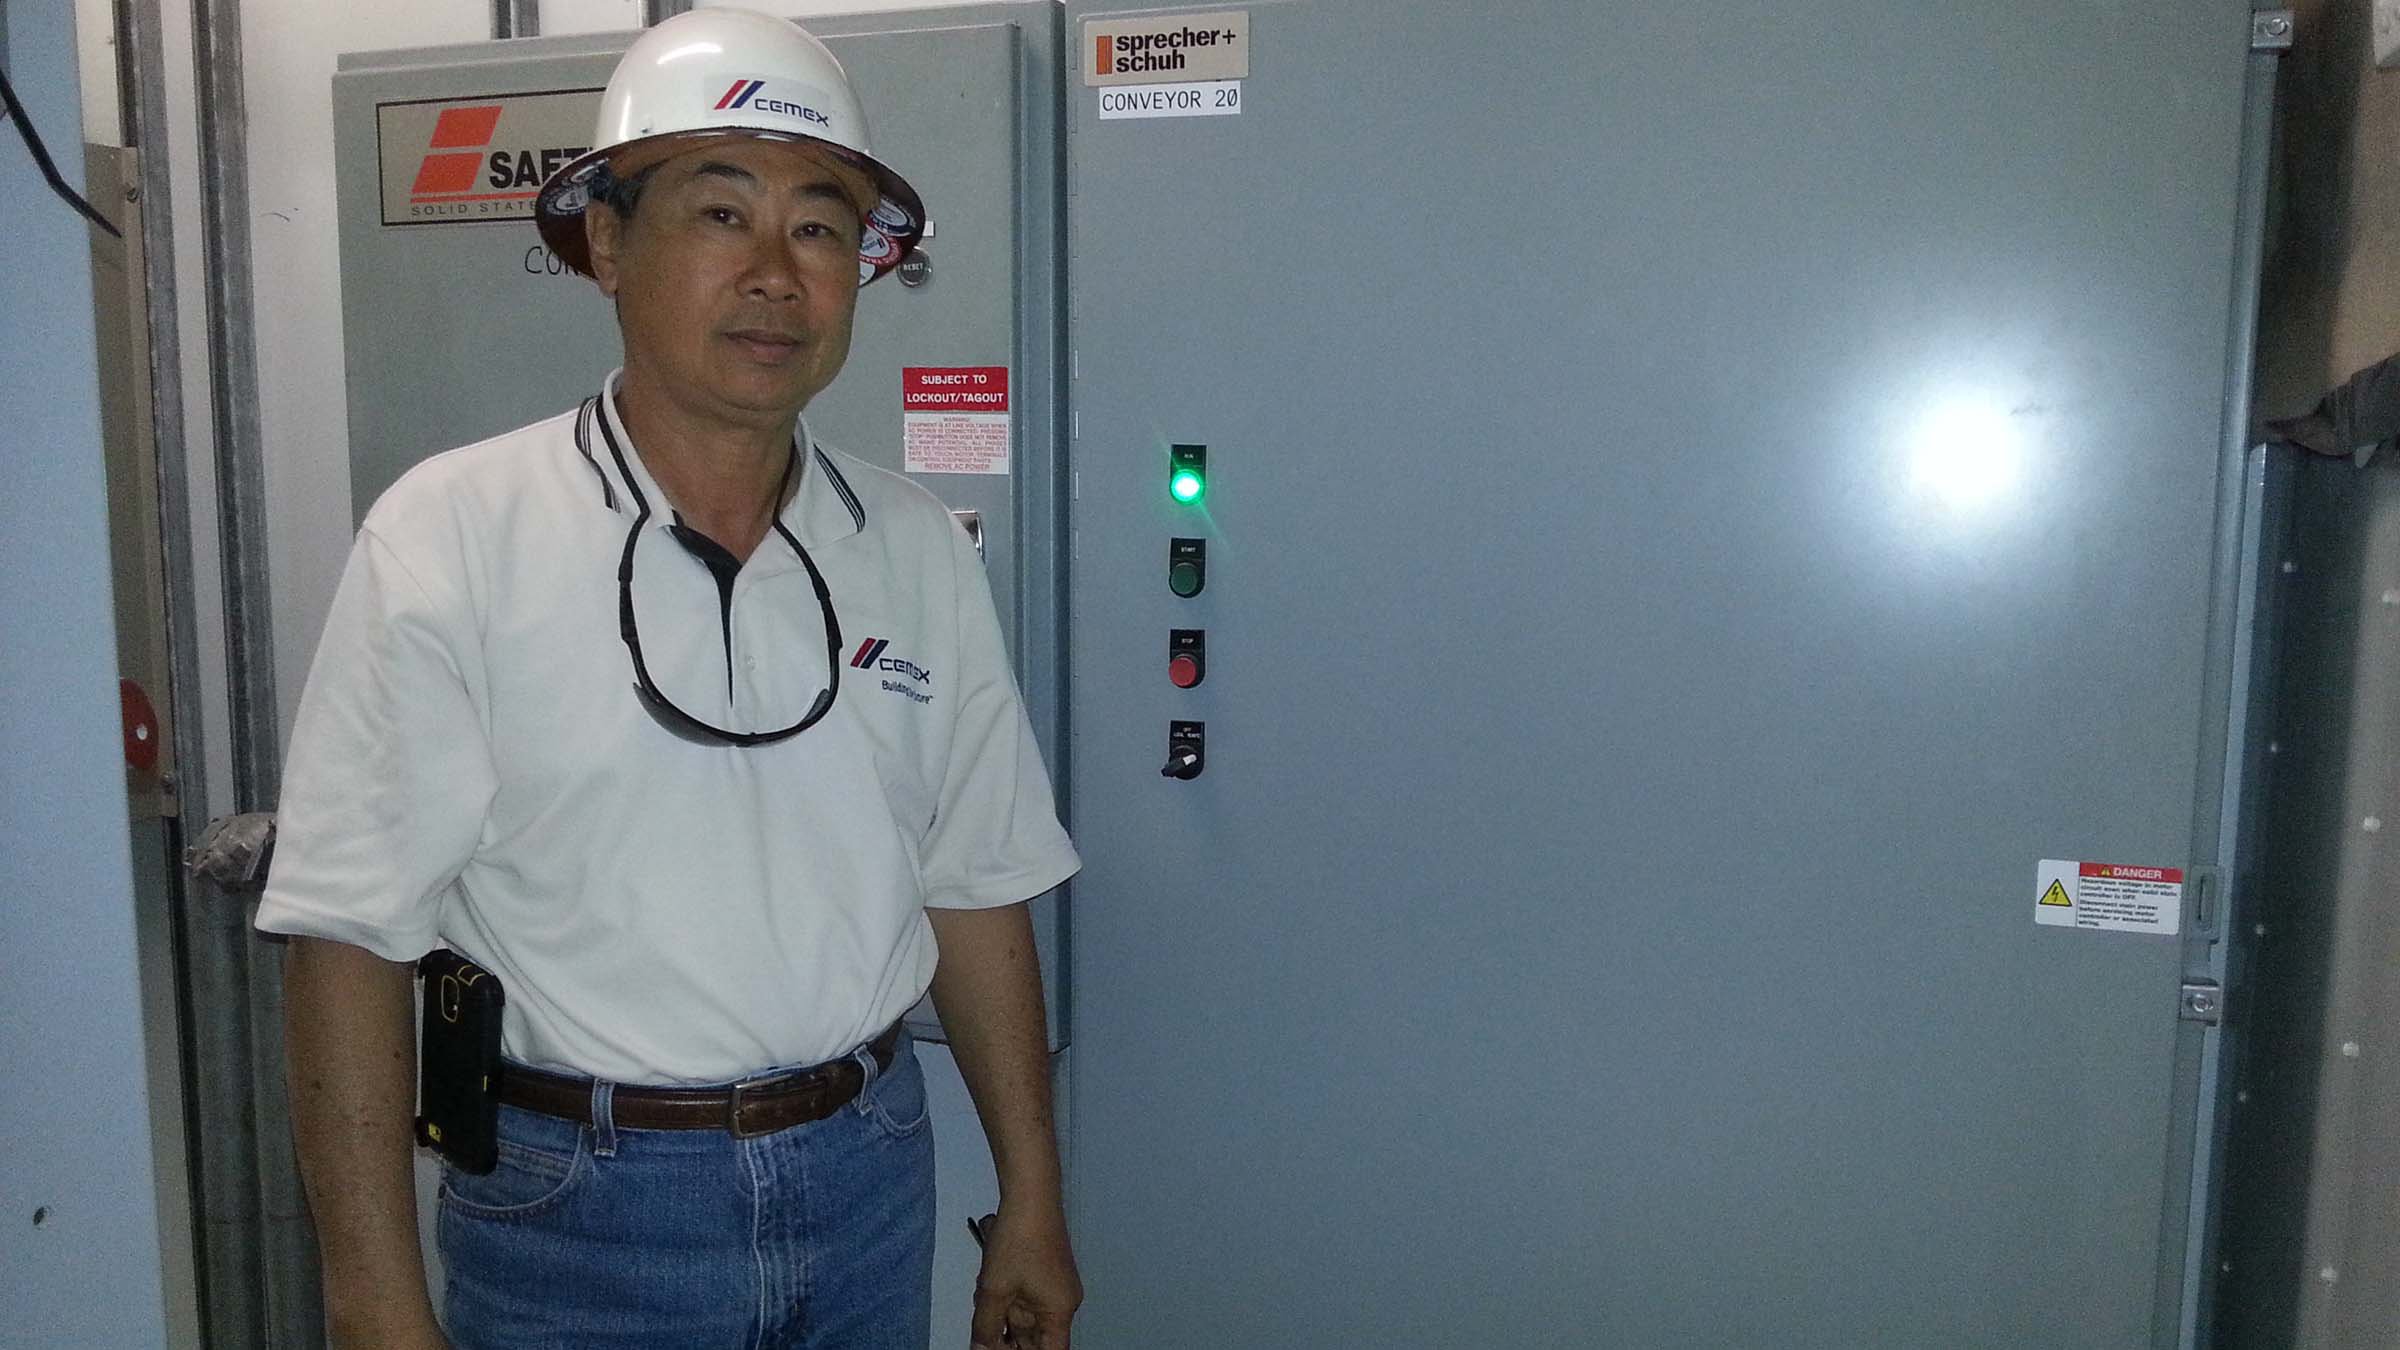 Eddie Yi, Aggregate Division Project Manager at Cemex standing in front of multi-softstarter motor control panel